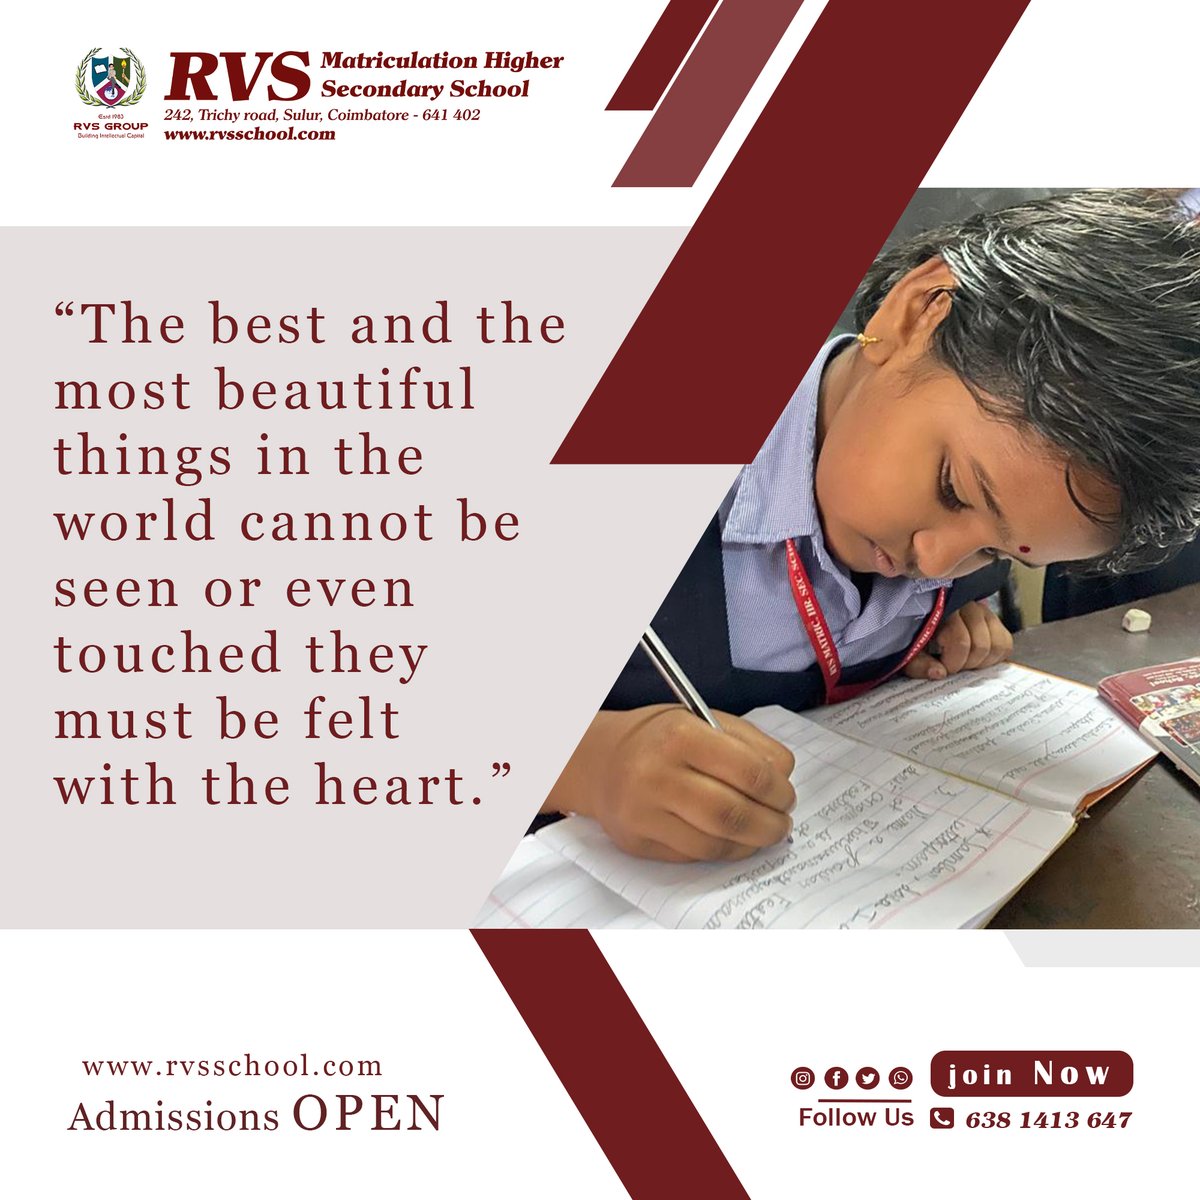 The best and the most beautiful things in the world cannot be seen or even touched -they must be felt with the heart.
#coimbatoreschool #coimbatoreschools #sulur #sulurschool
#rvsschool #rvsmatriculationhrsecschool #schoollife #classroom #schoolmemories
#happybirthday